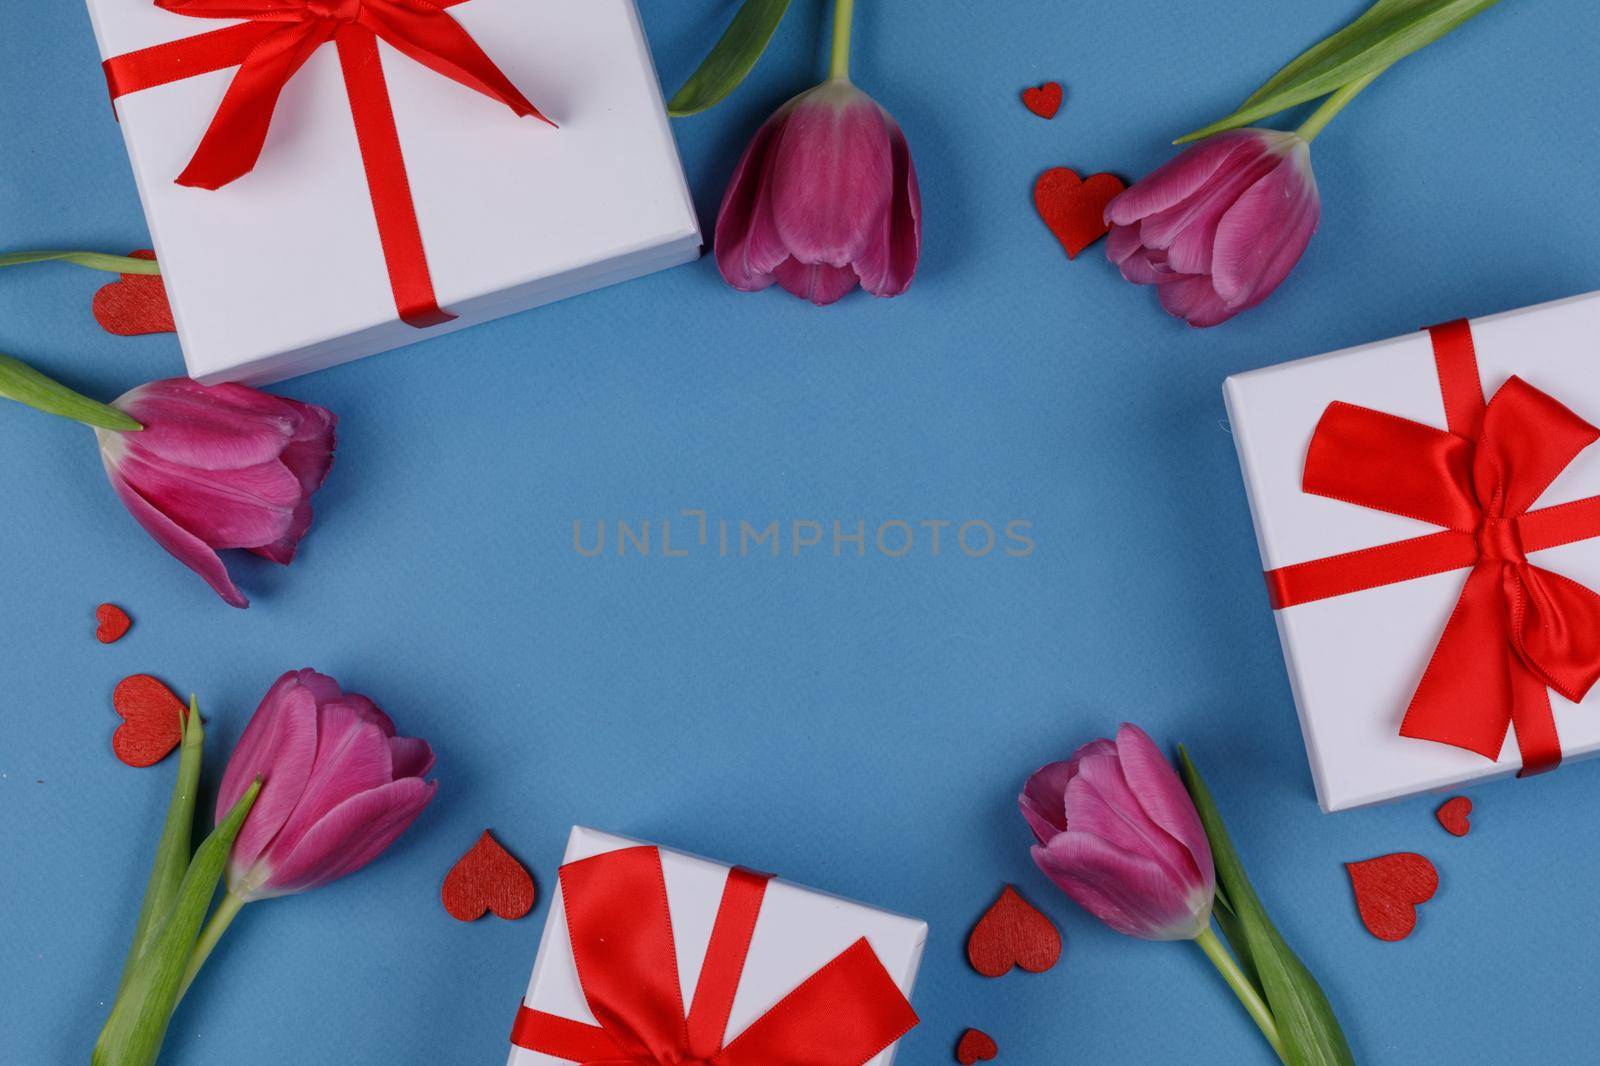 Pink tulip flowers gifts red hearts and gifts composition on blue background top view with copy space. Valentine's day, birthday, wedding, Mother's day concept. Copy space